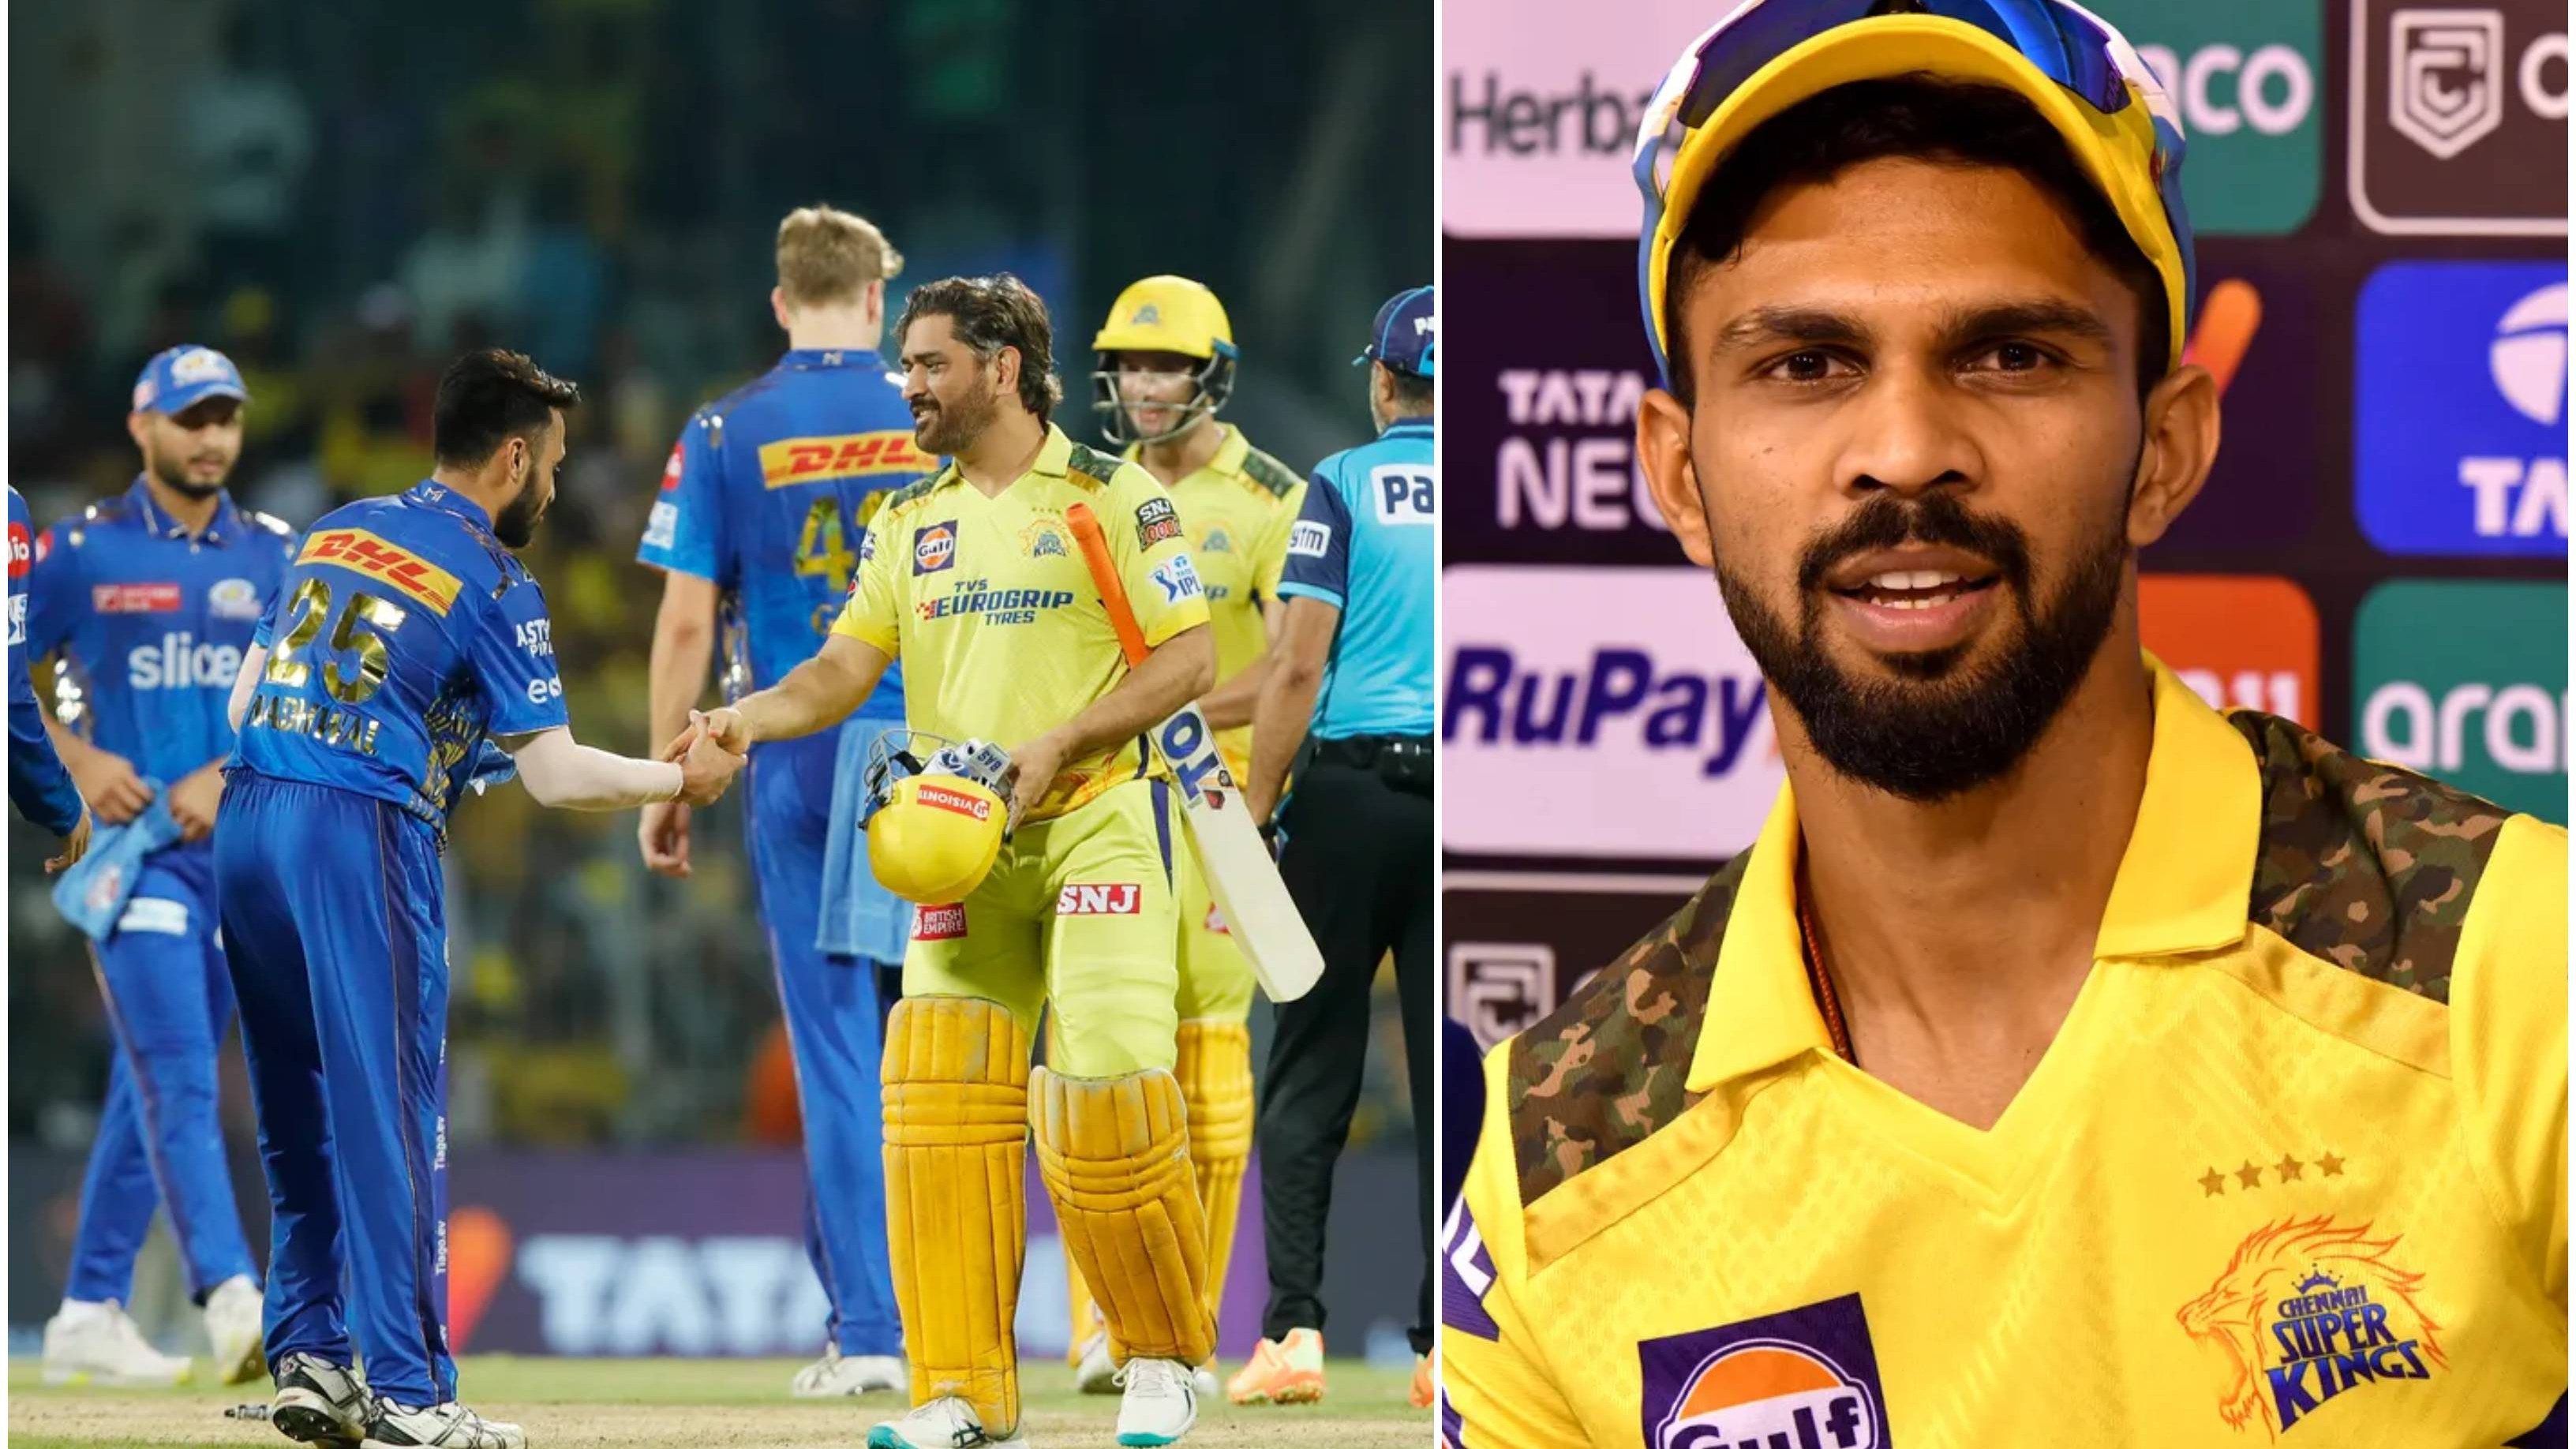 IPL 2023: “We would like to play on any surface,” says Ruturaj Gaikwad after CSK’s comprehensive win over MI